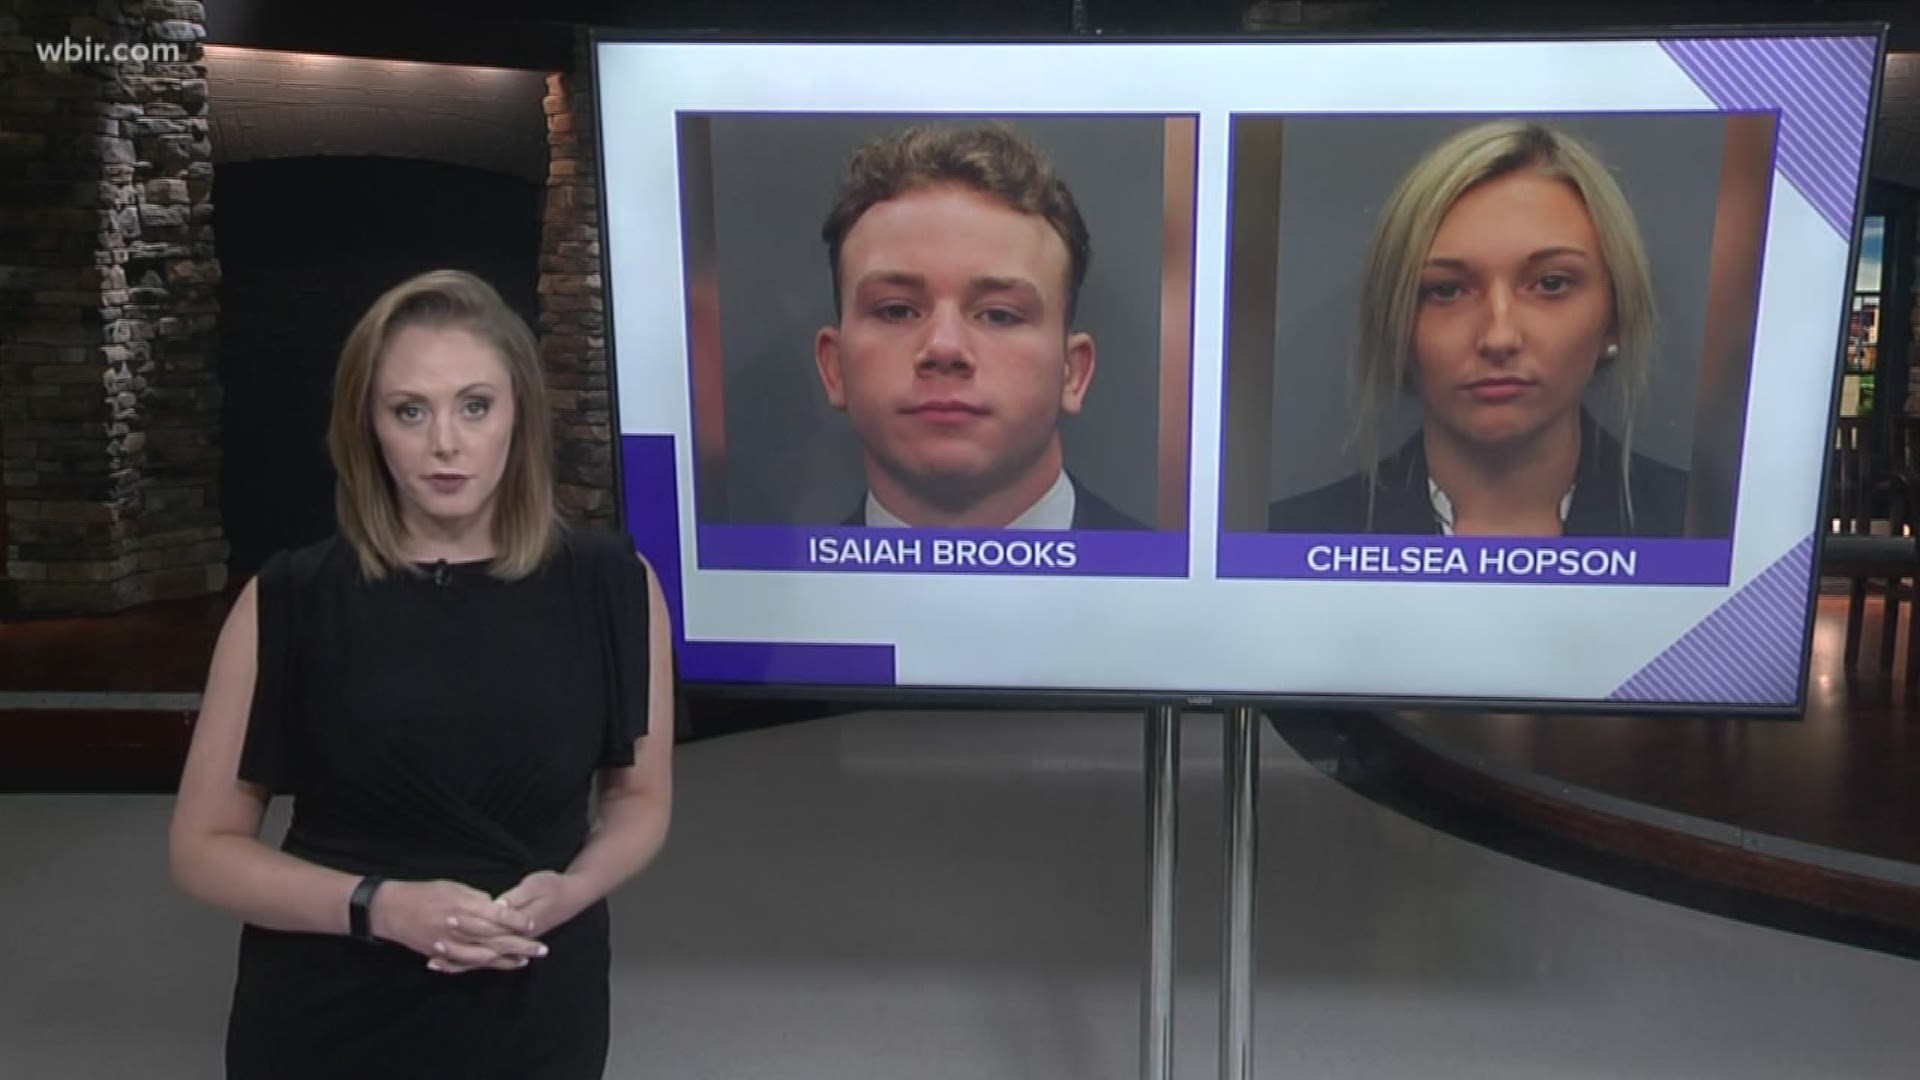 15-year-old Zachary Munday died in May. Isaiah Brooks and Chelsea Hopson, both 18, appeared today in Knox County Criminal Court. Brooks pleaded guilty to reckless homicide, and Hopson pleaded guilty to being an accessory after the fact.